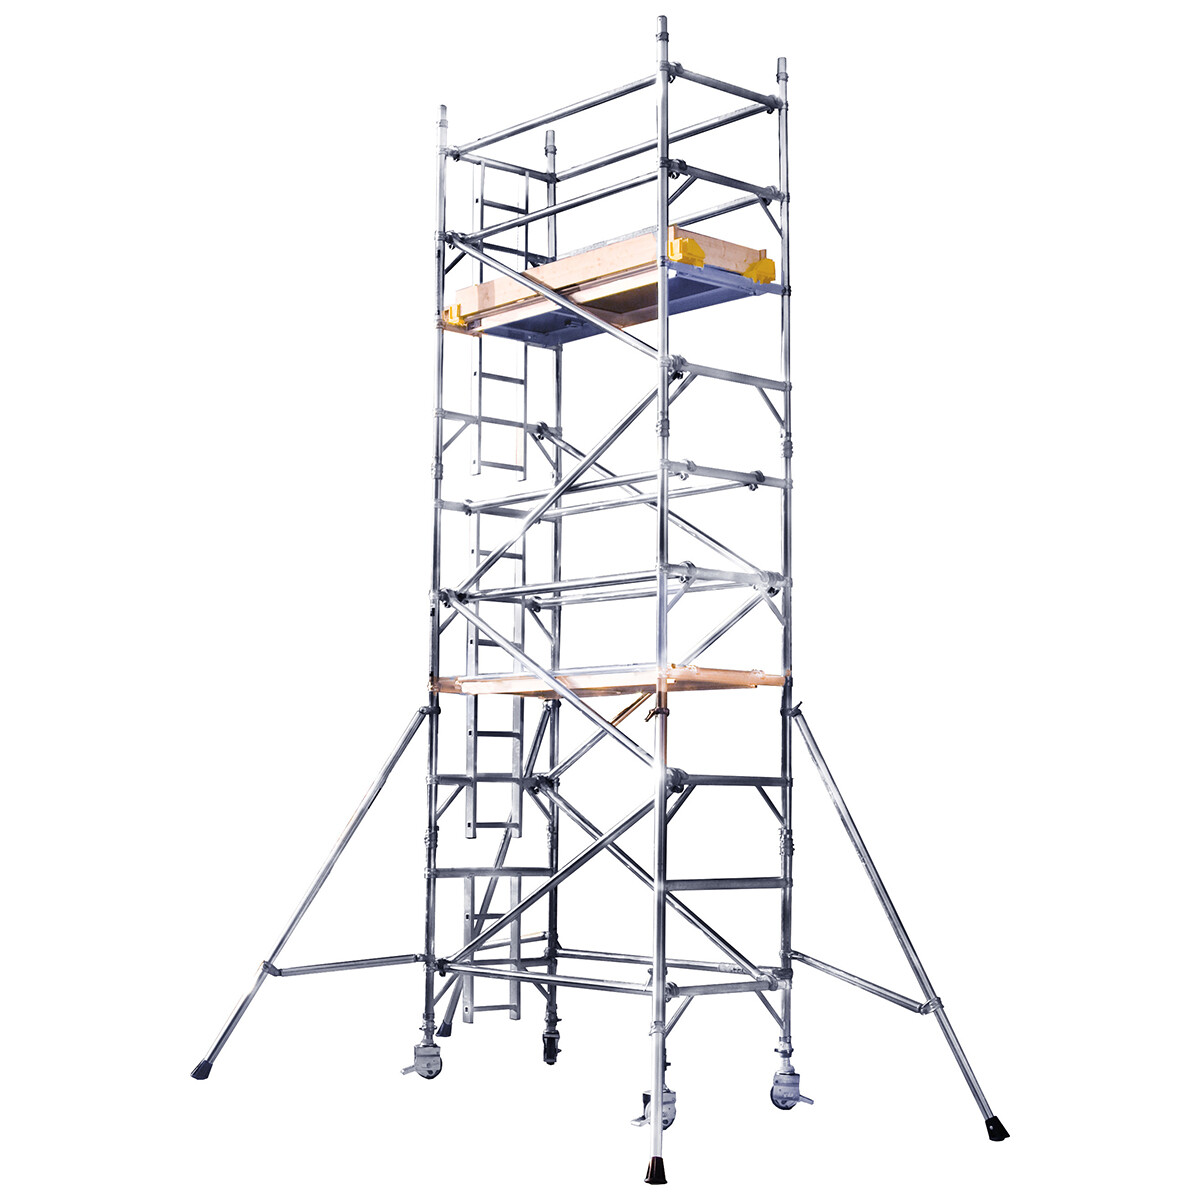 Narrow Span Mobile Tower - 0.85m wide x 7.3m high